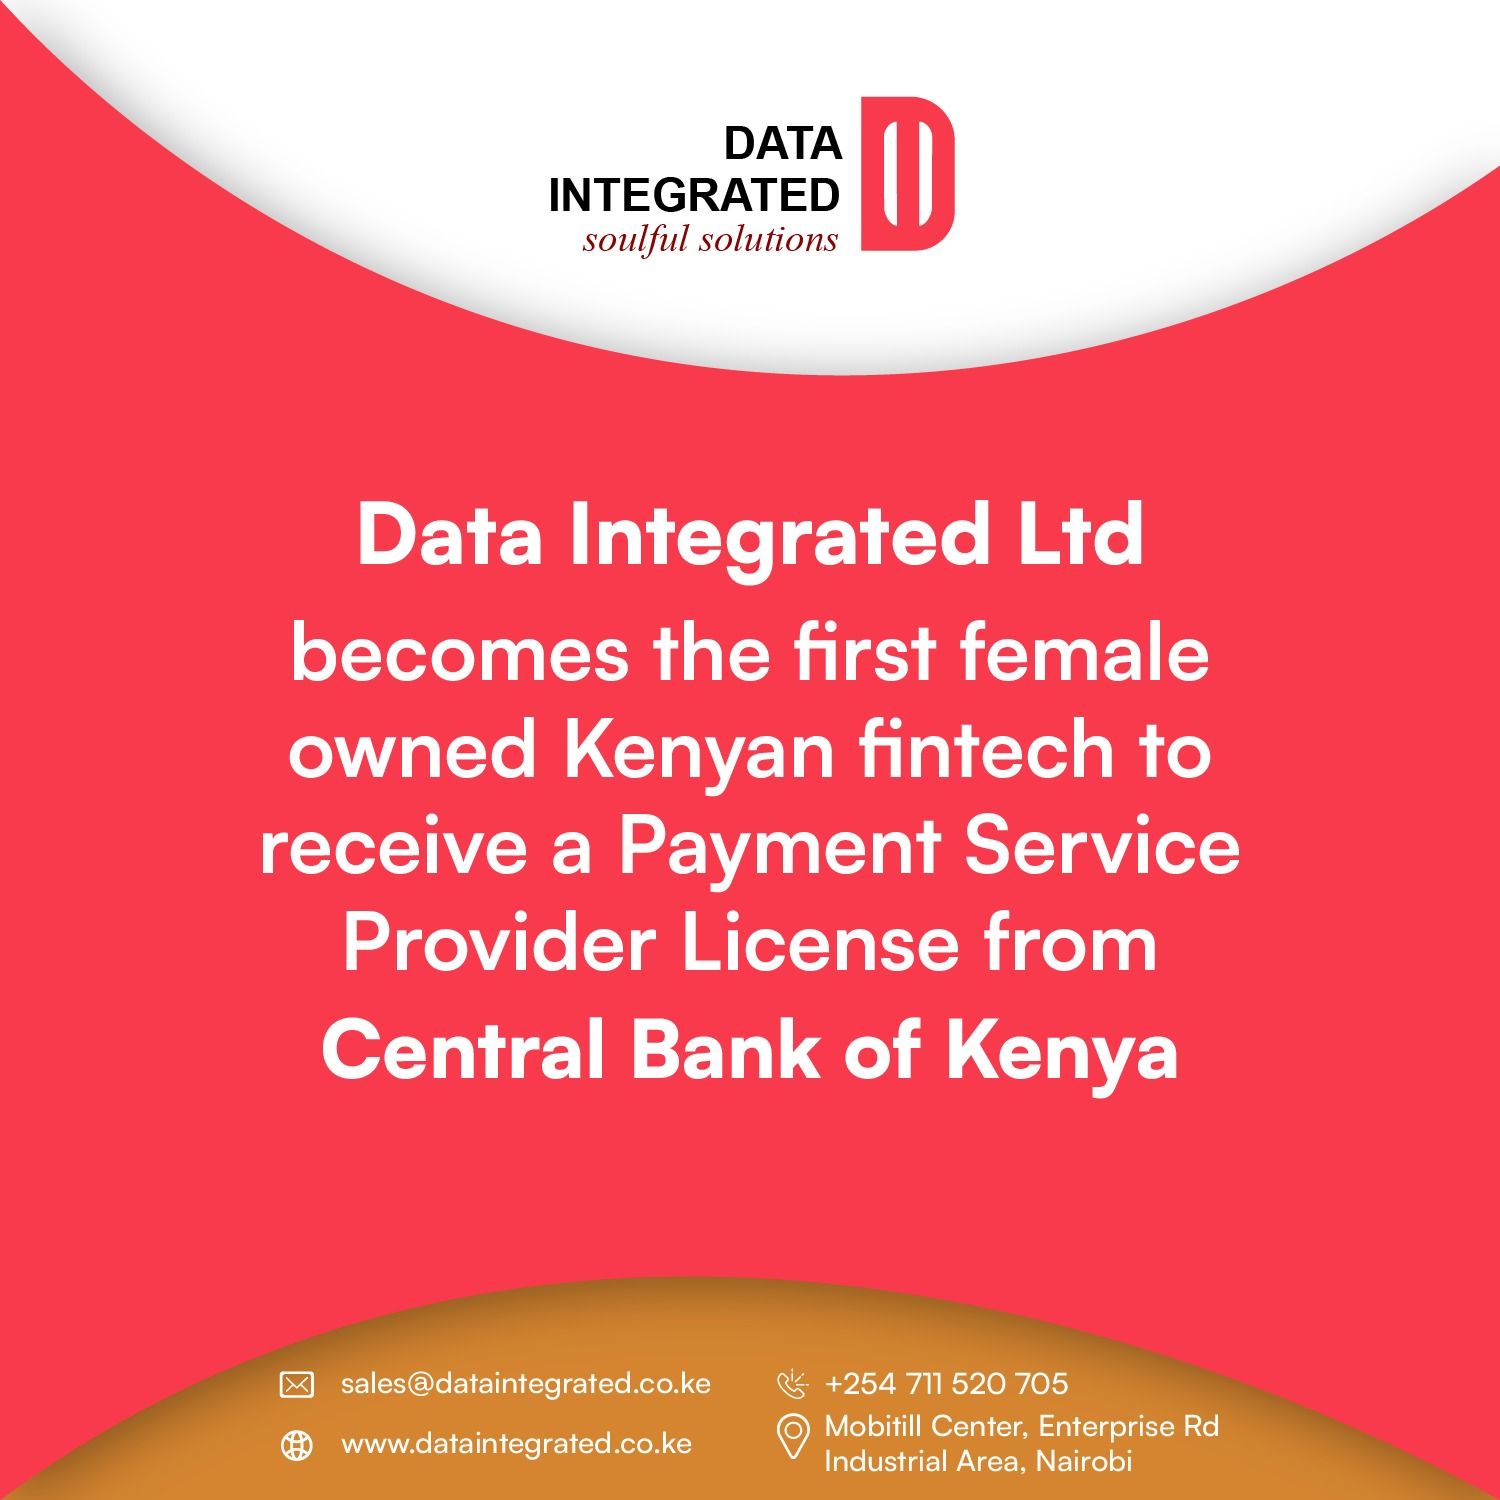 DATA INTEGRATED LTD BECOMES THE FIRST FEMALE OWNED KENYAN FINTECH TO RECEIVE A LICENSE FROM THE CENTRAL BANK OF KENYA TO OPERATE AS A PAYMENT SERVICE PROVIDER IN KENYA